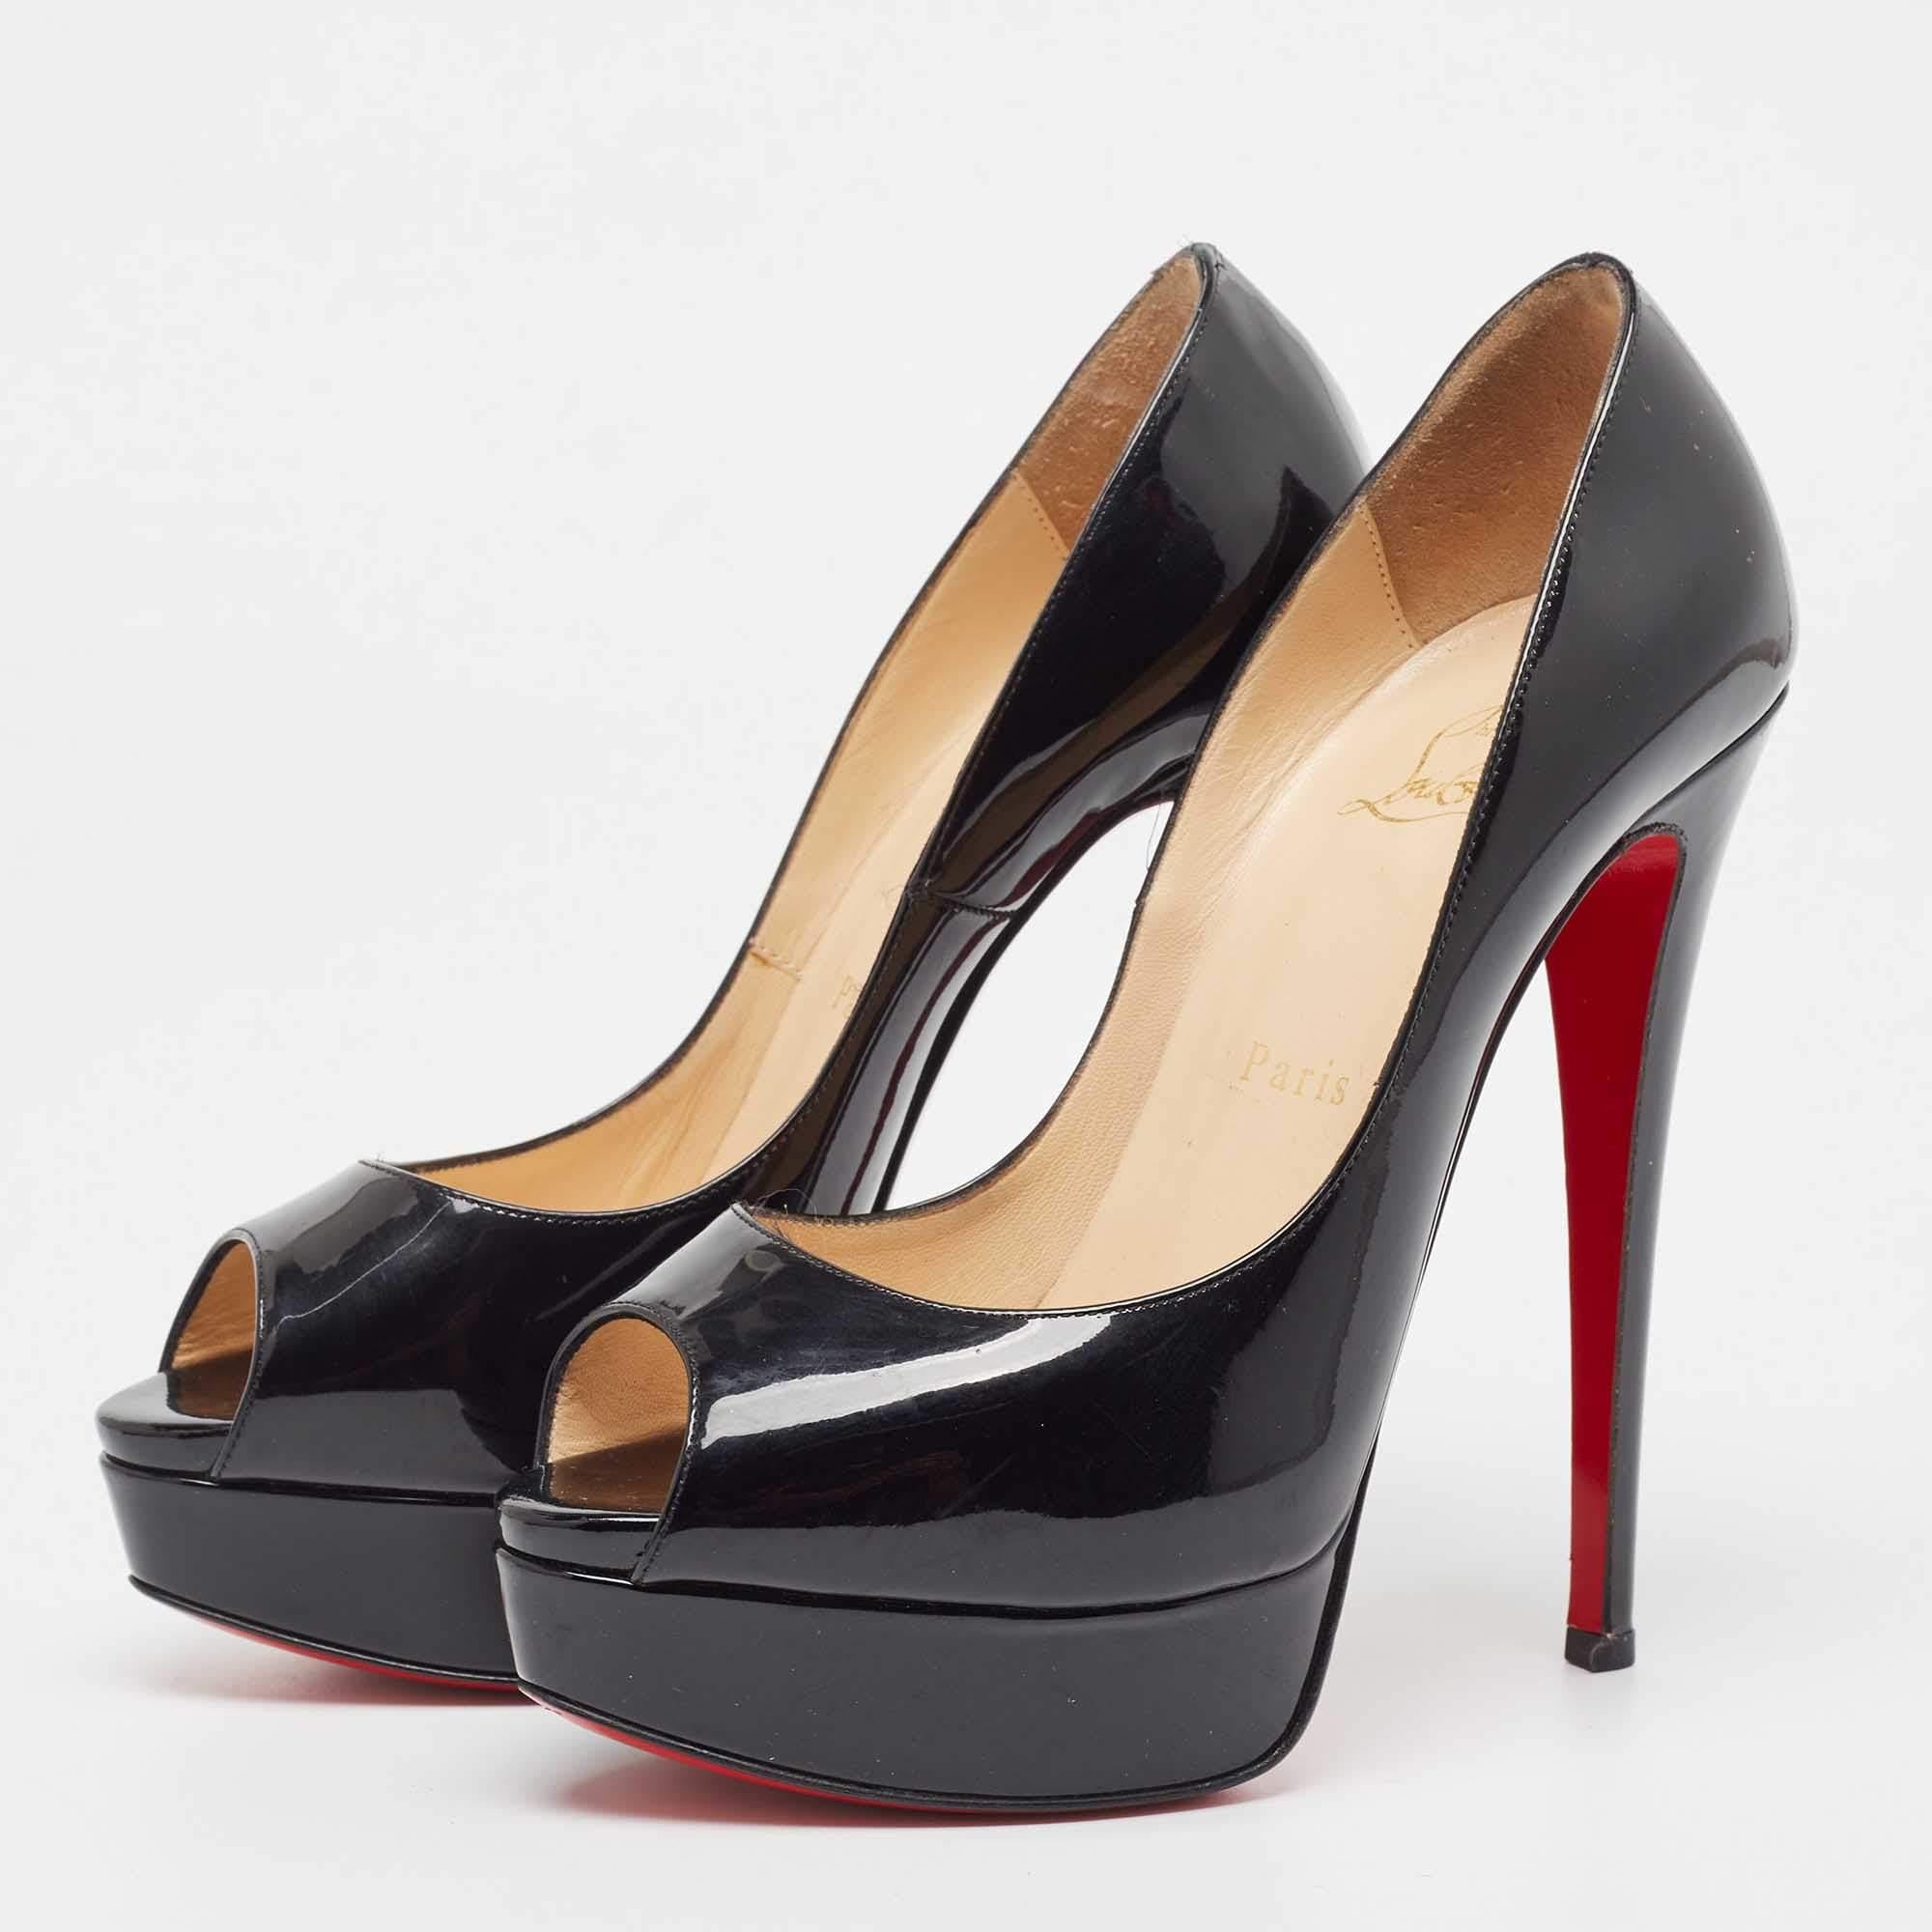 Stand out from the crowd with this pair of Christian Louboutin pumps that exude high fashion with class. Crafted from patent leather, this is a creation from their Lady Peep collection. It features a black shade with peep toes and a glossy exterior.